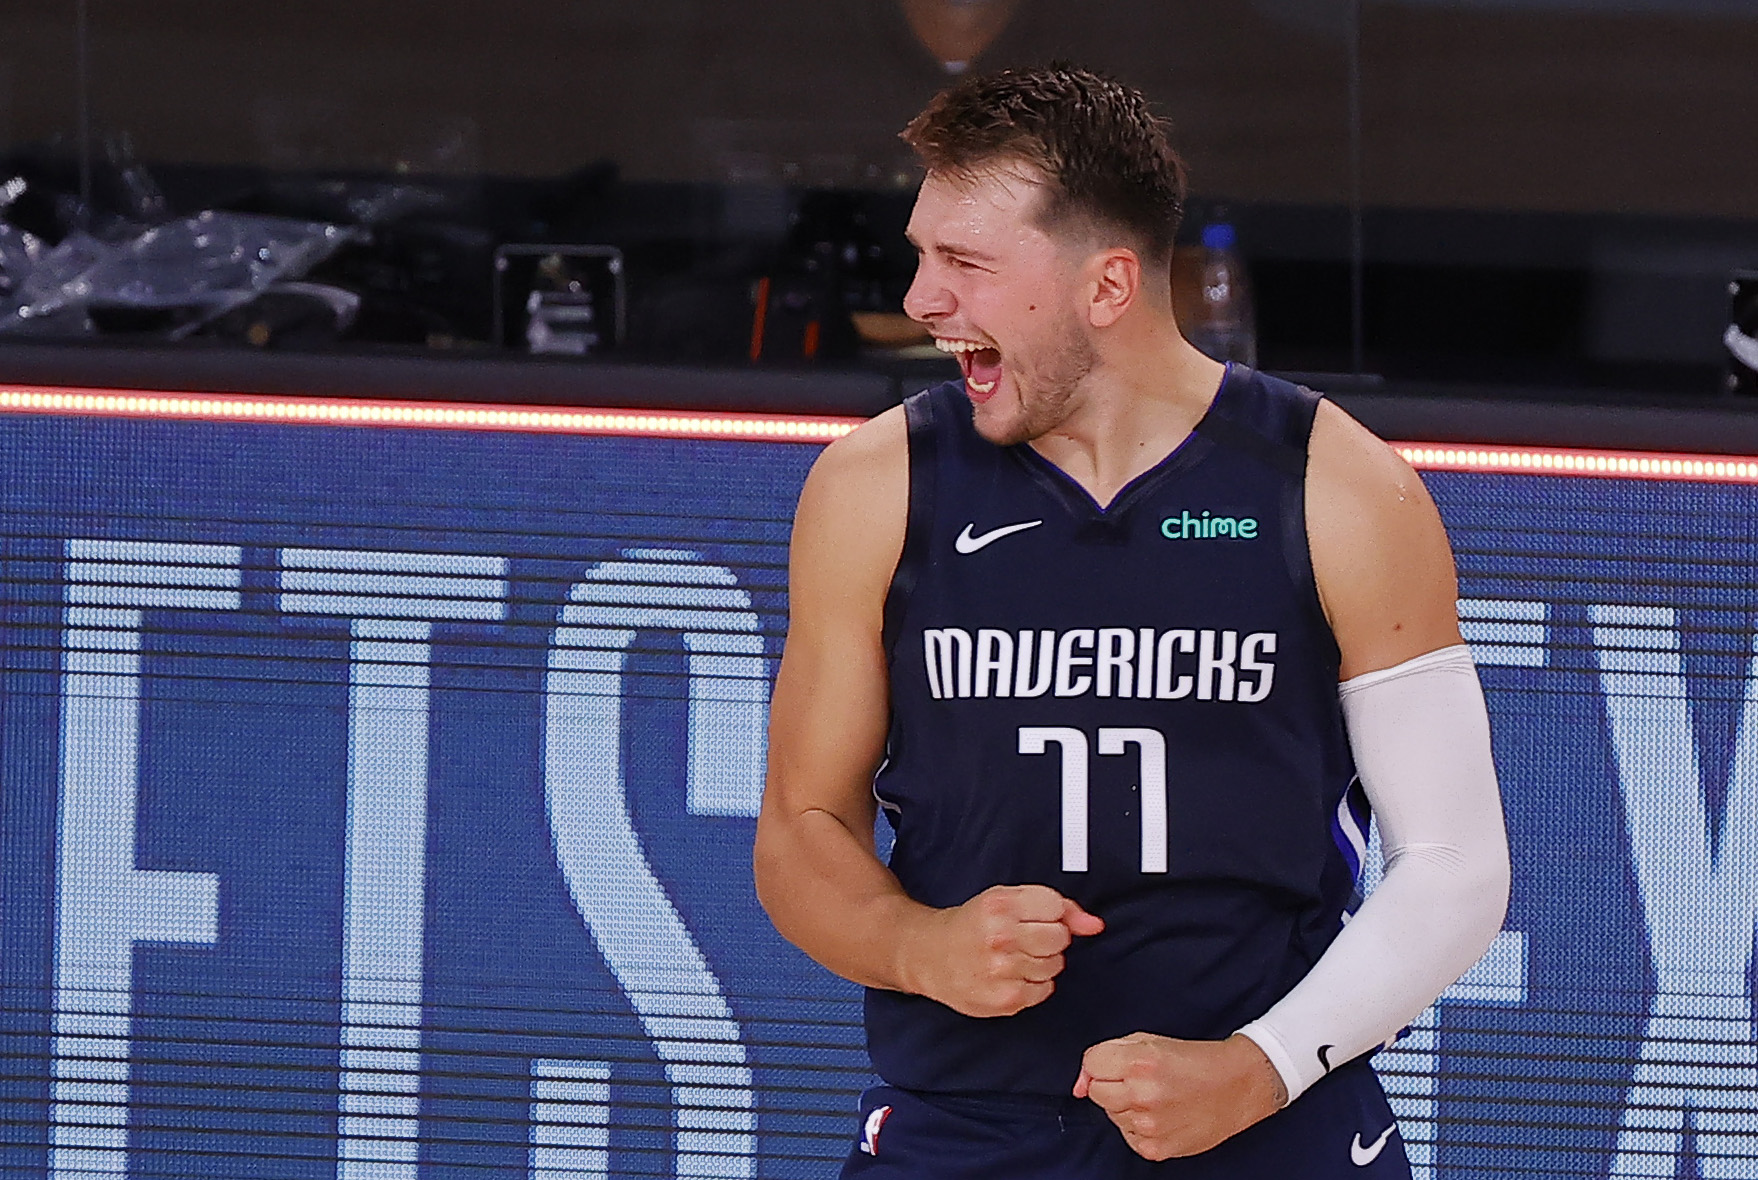 Luka Doncic's weight takes over NBA broadcast